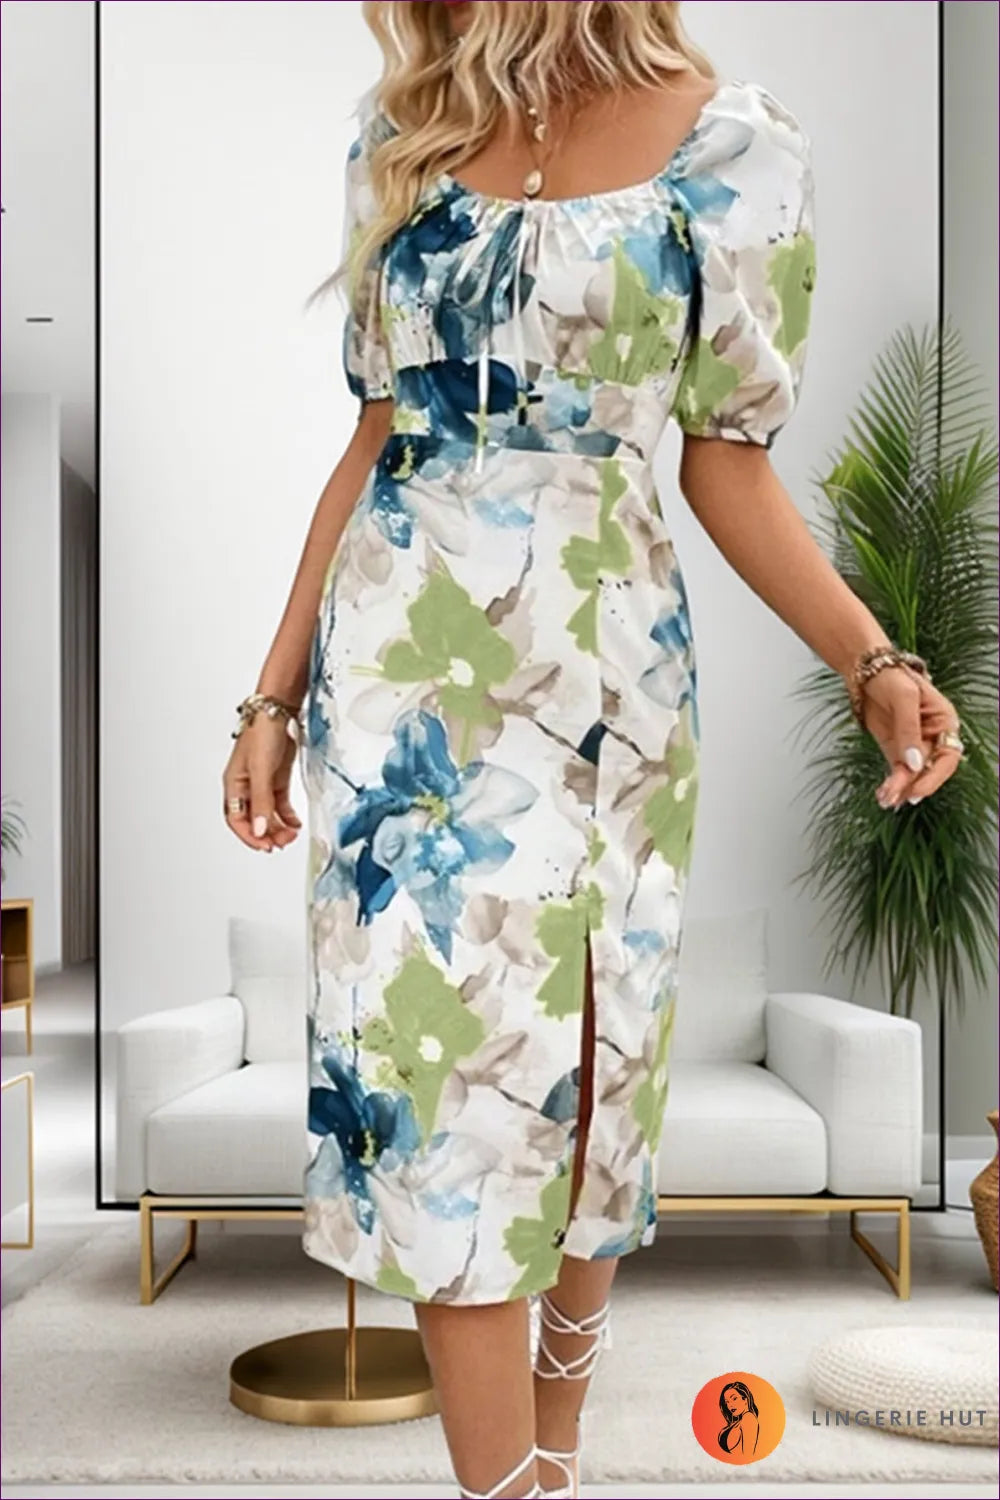 Sexy Floral Summer Dress – Turn Heads Now For x